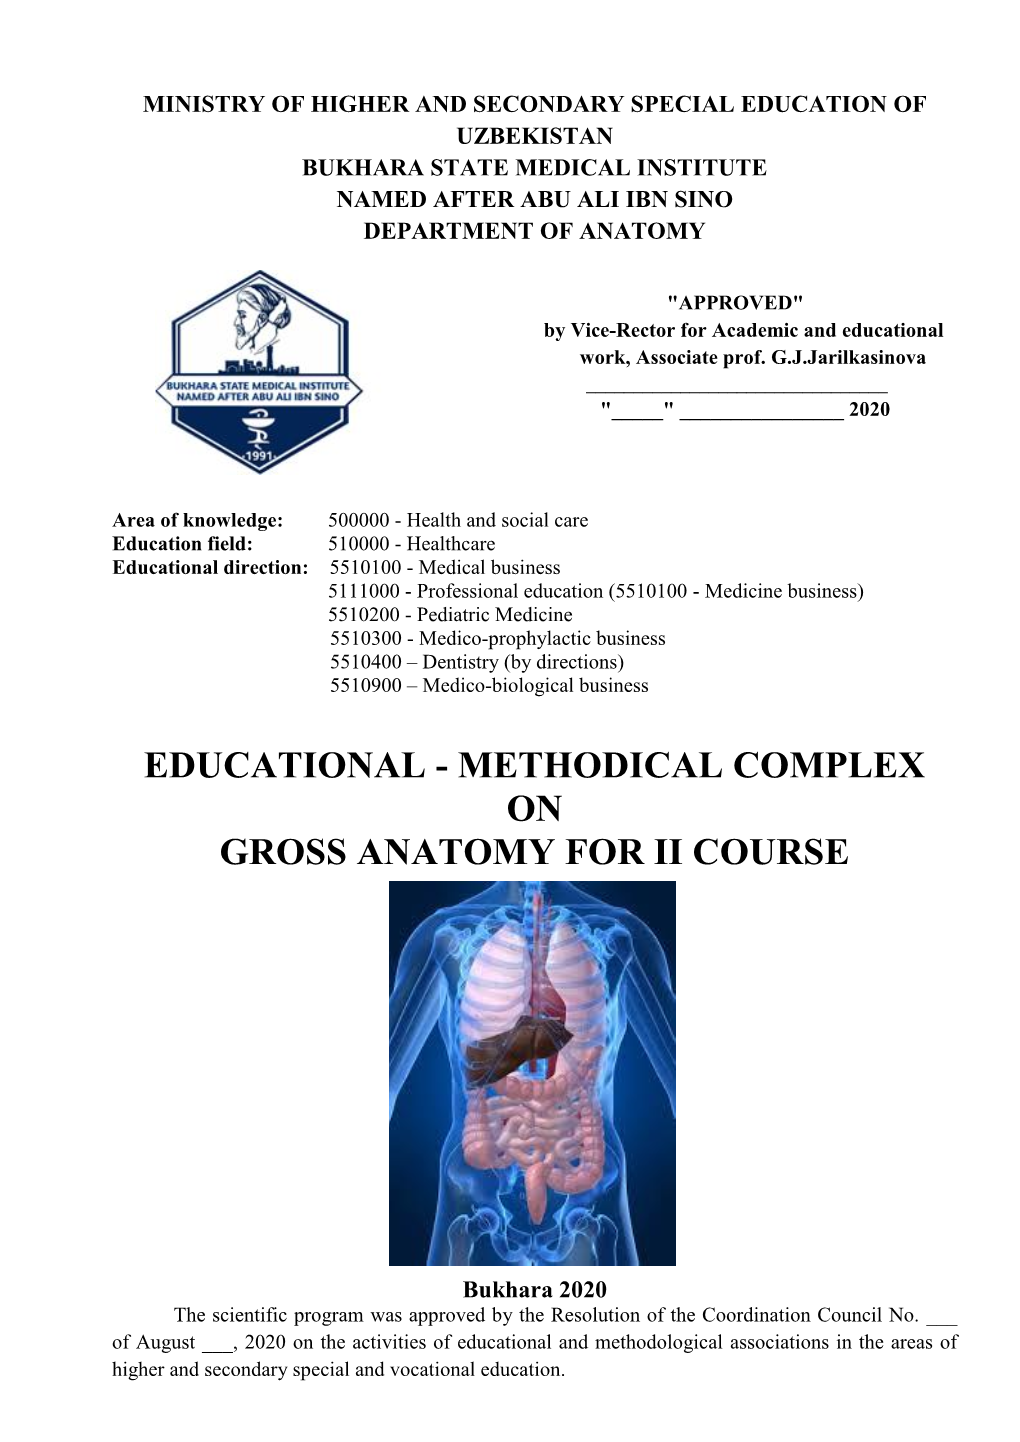 Methodical Complex on Gross Anatomy for Ii Course